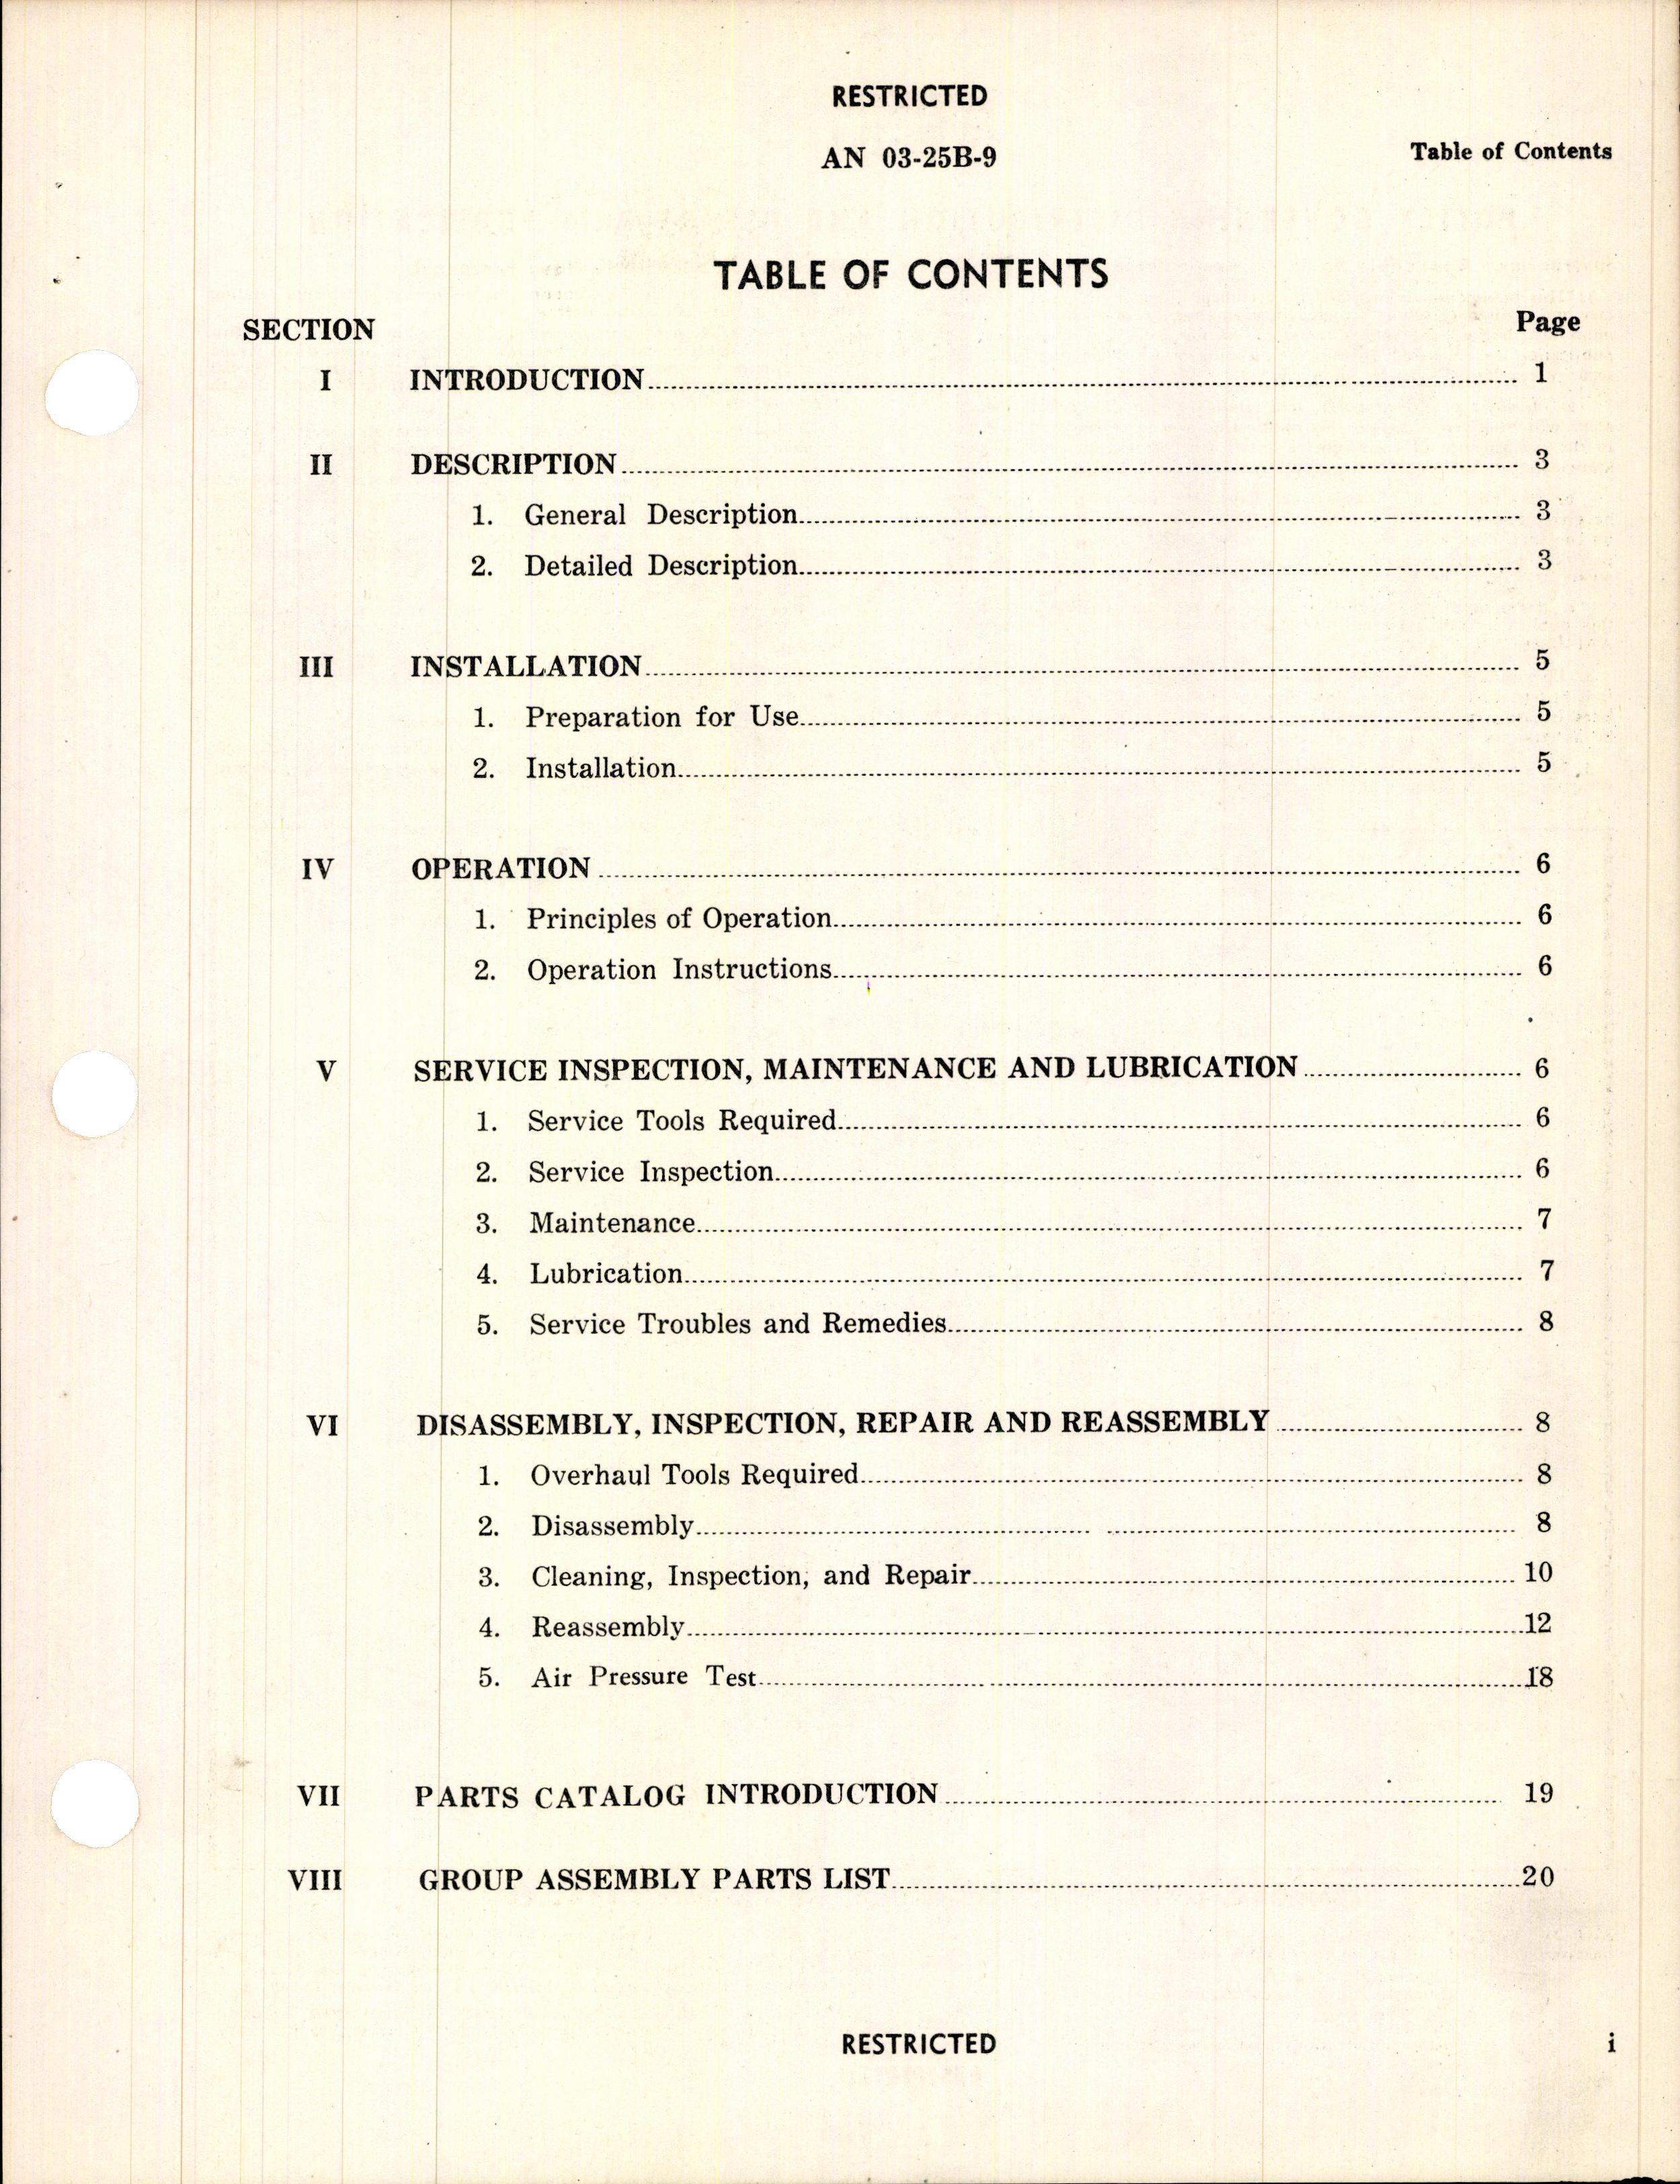 Sample page 3 from AirCorps Library document: Handbook of Instructions with Parts Catalog for Hayes Expander Tube Brakes